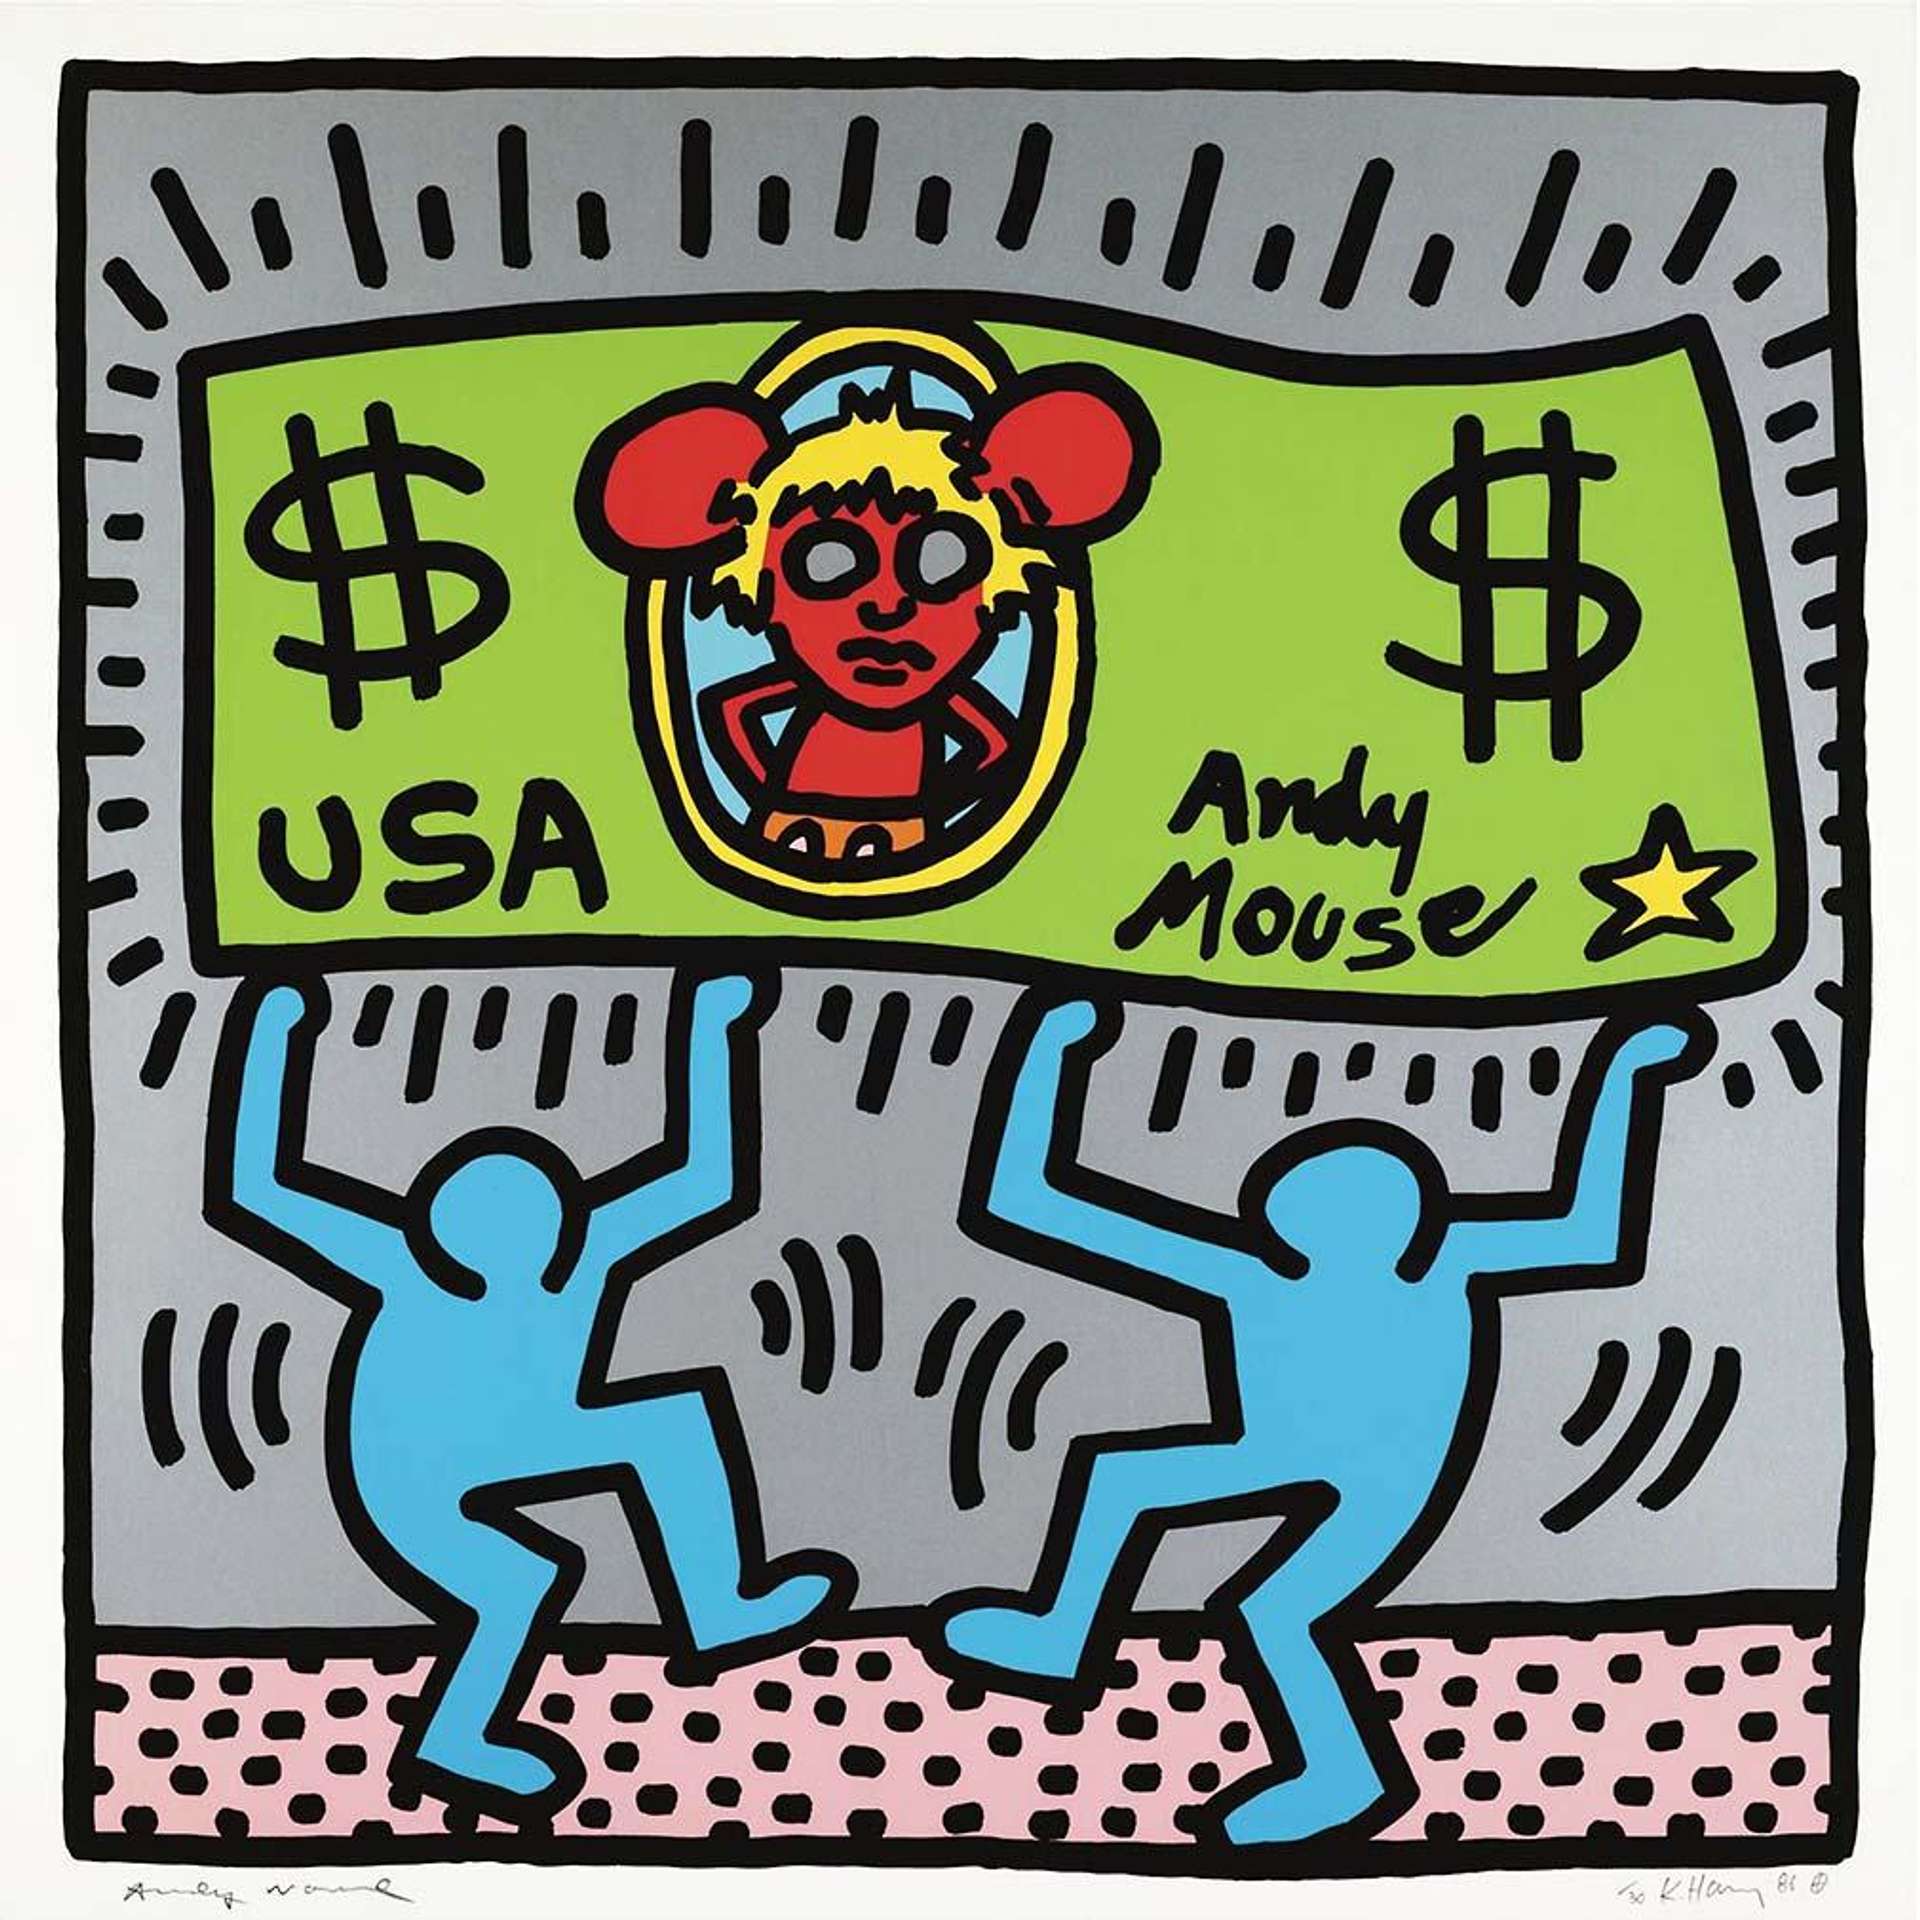 Andy Mouse 3 by Keith Haring - MyArtBroker